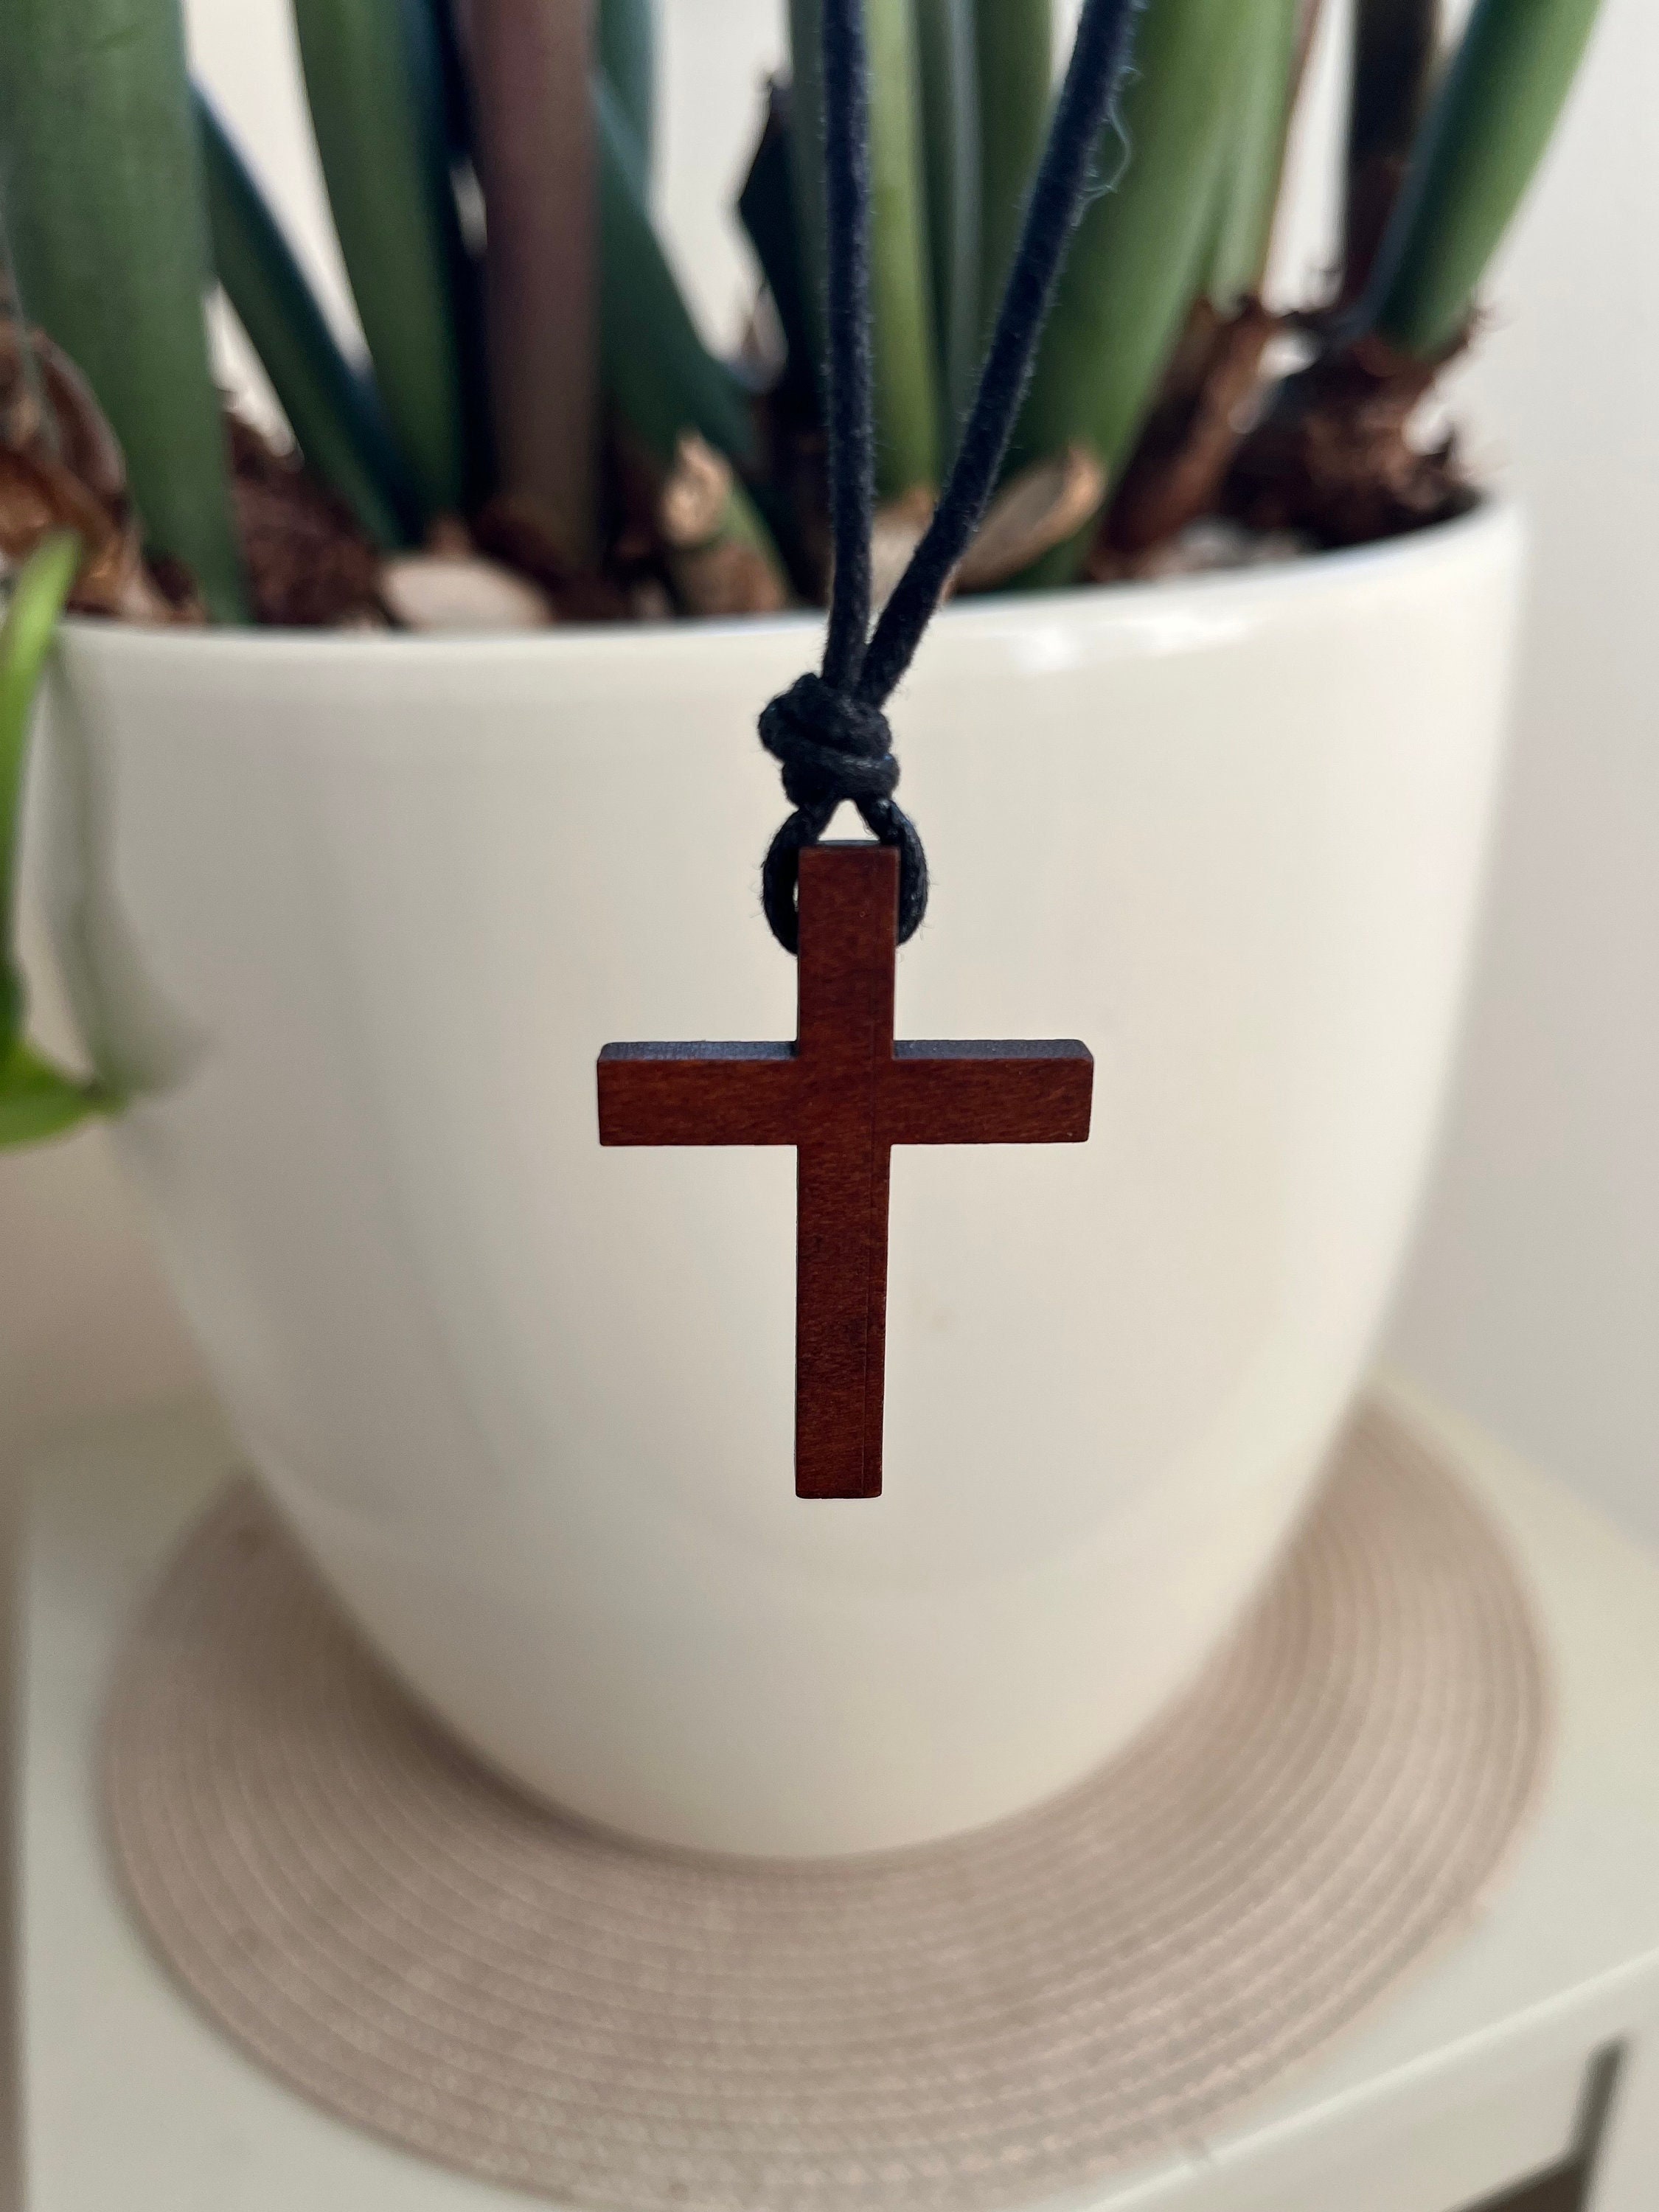 Wood Cross Necklace for Men & Women, Adjustable Leather Cord With Wooden  Cross Pendant, Gift for Catholic Boy, Christian Cross Choker, Psalm 